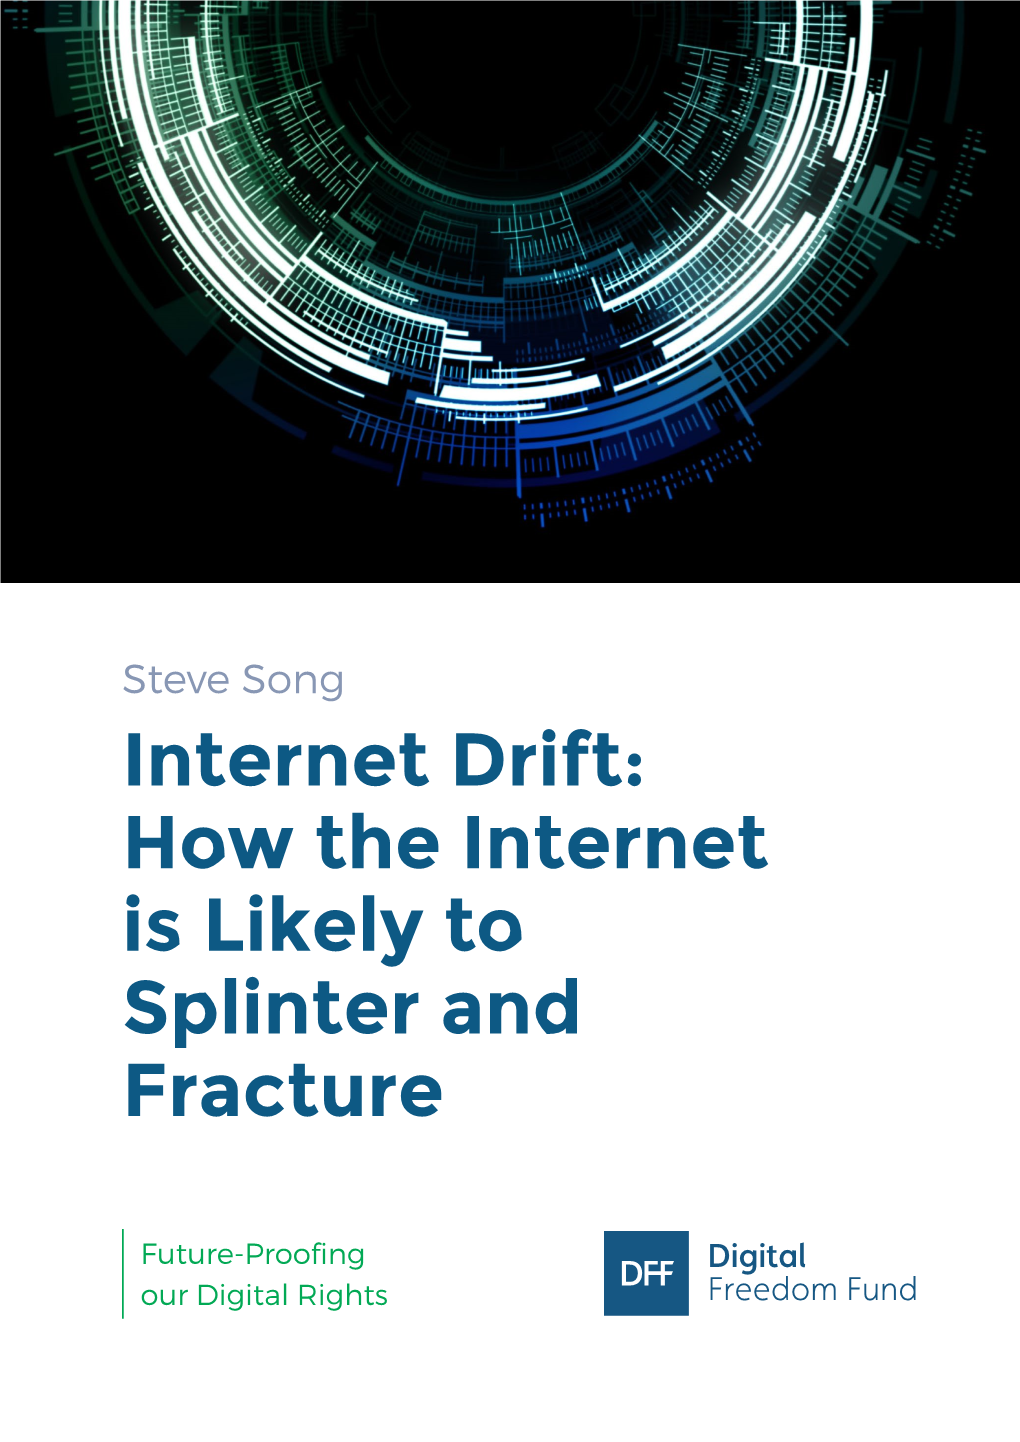 Internet Drift: How the Internet Is Likely to Splinter and Fracture